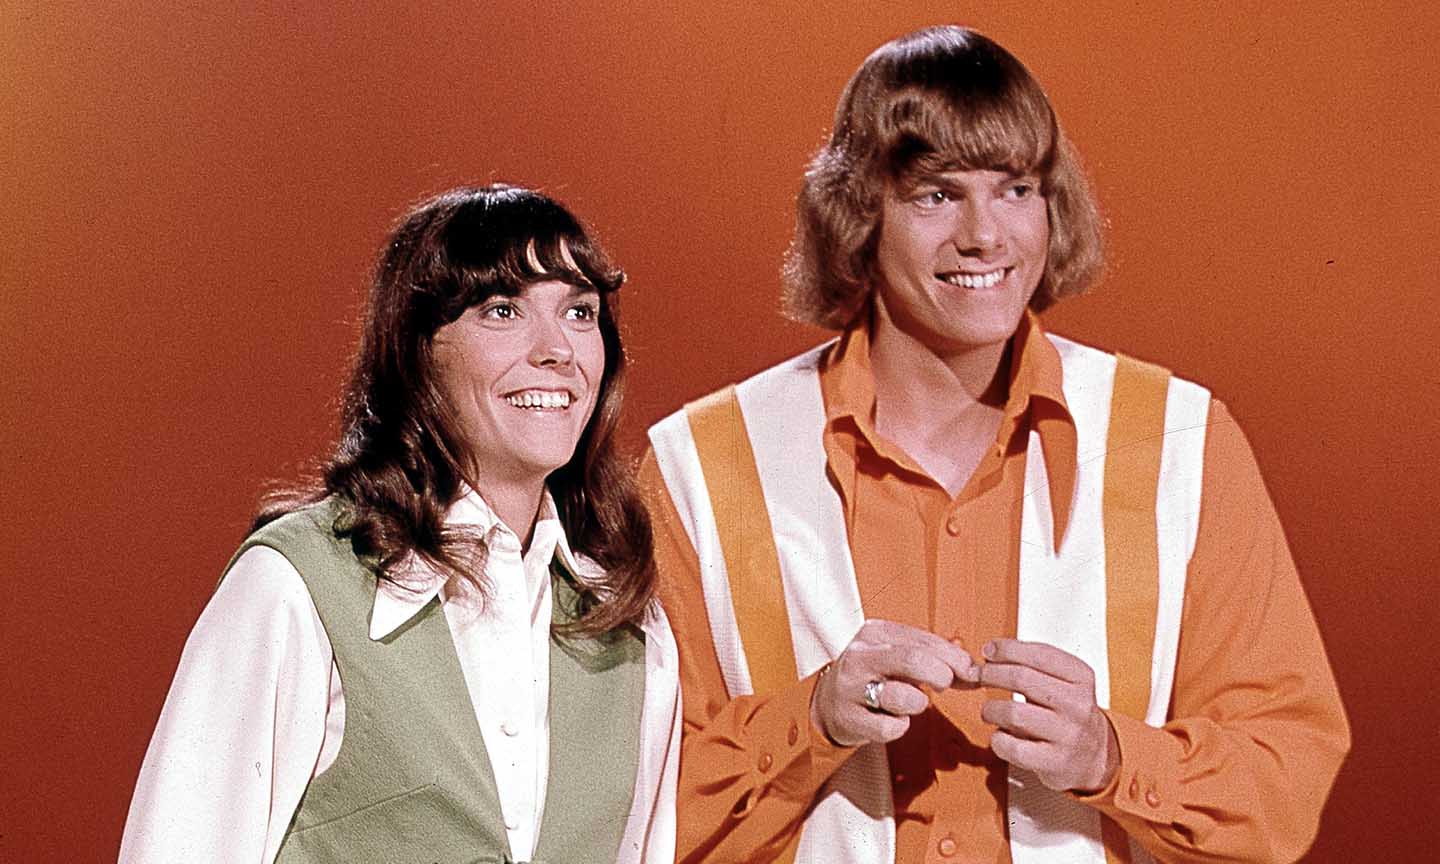 The Carpenters 70s sibling vocal duo